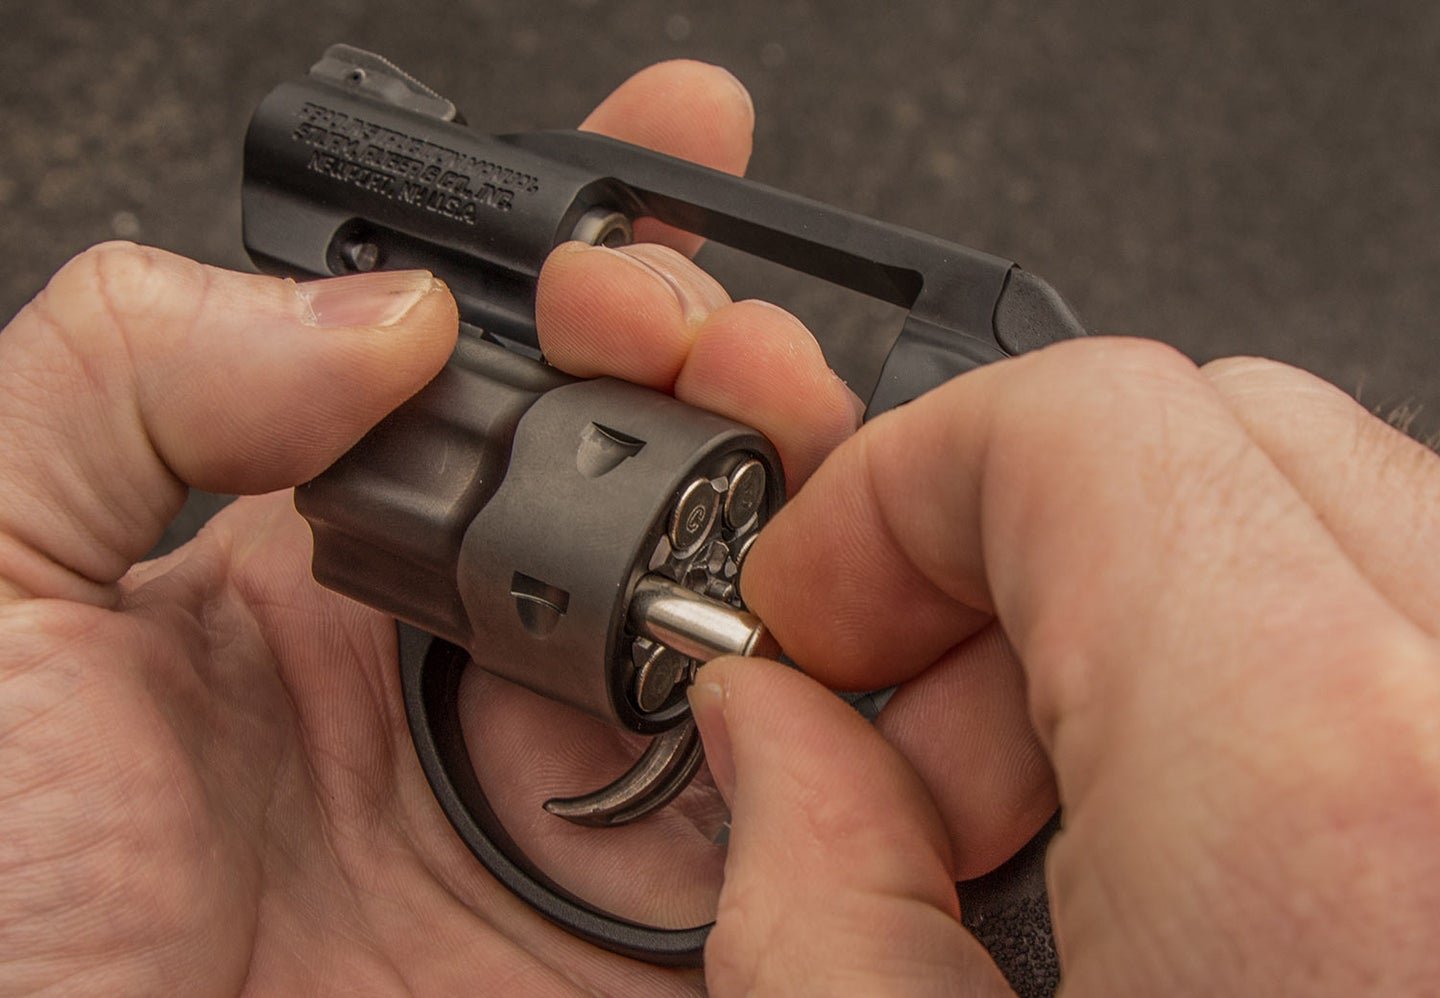 The Beginner’s Guide to Concealed Carry